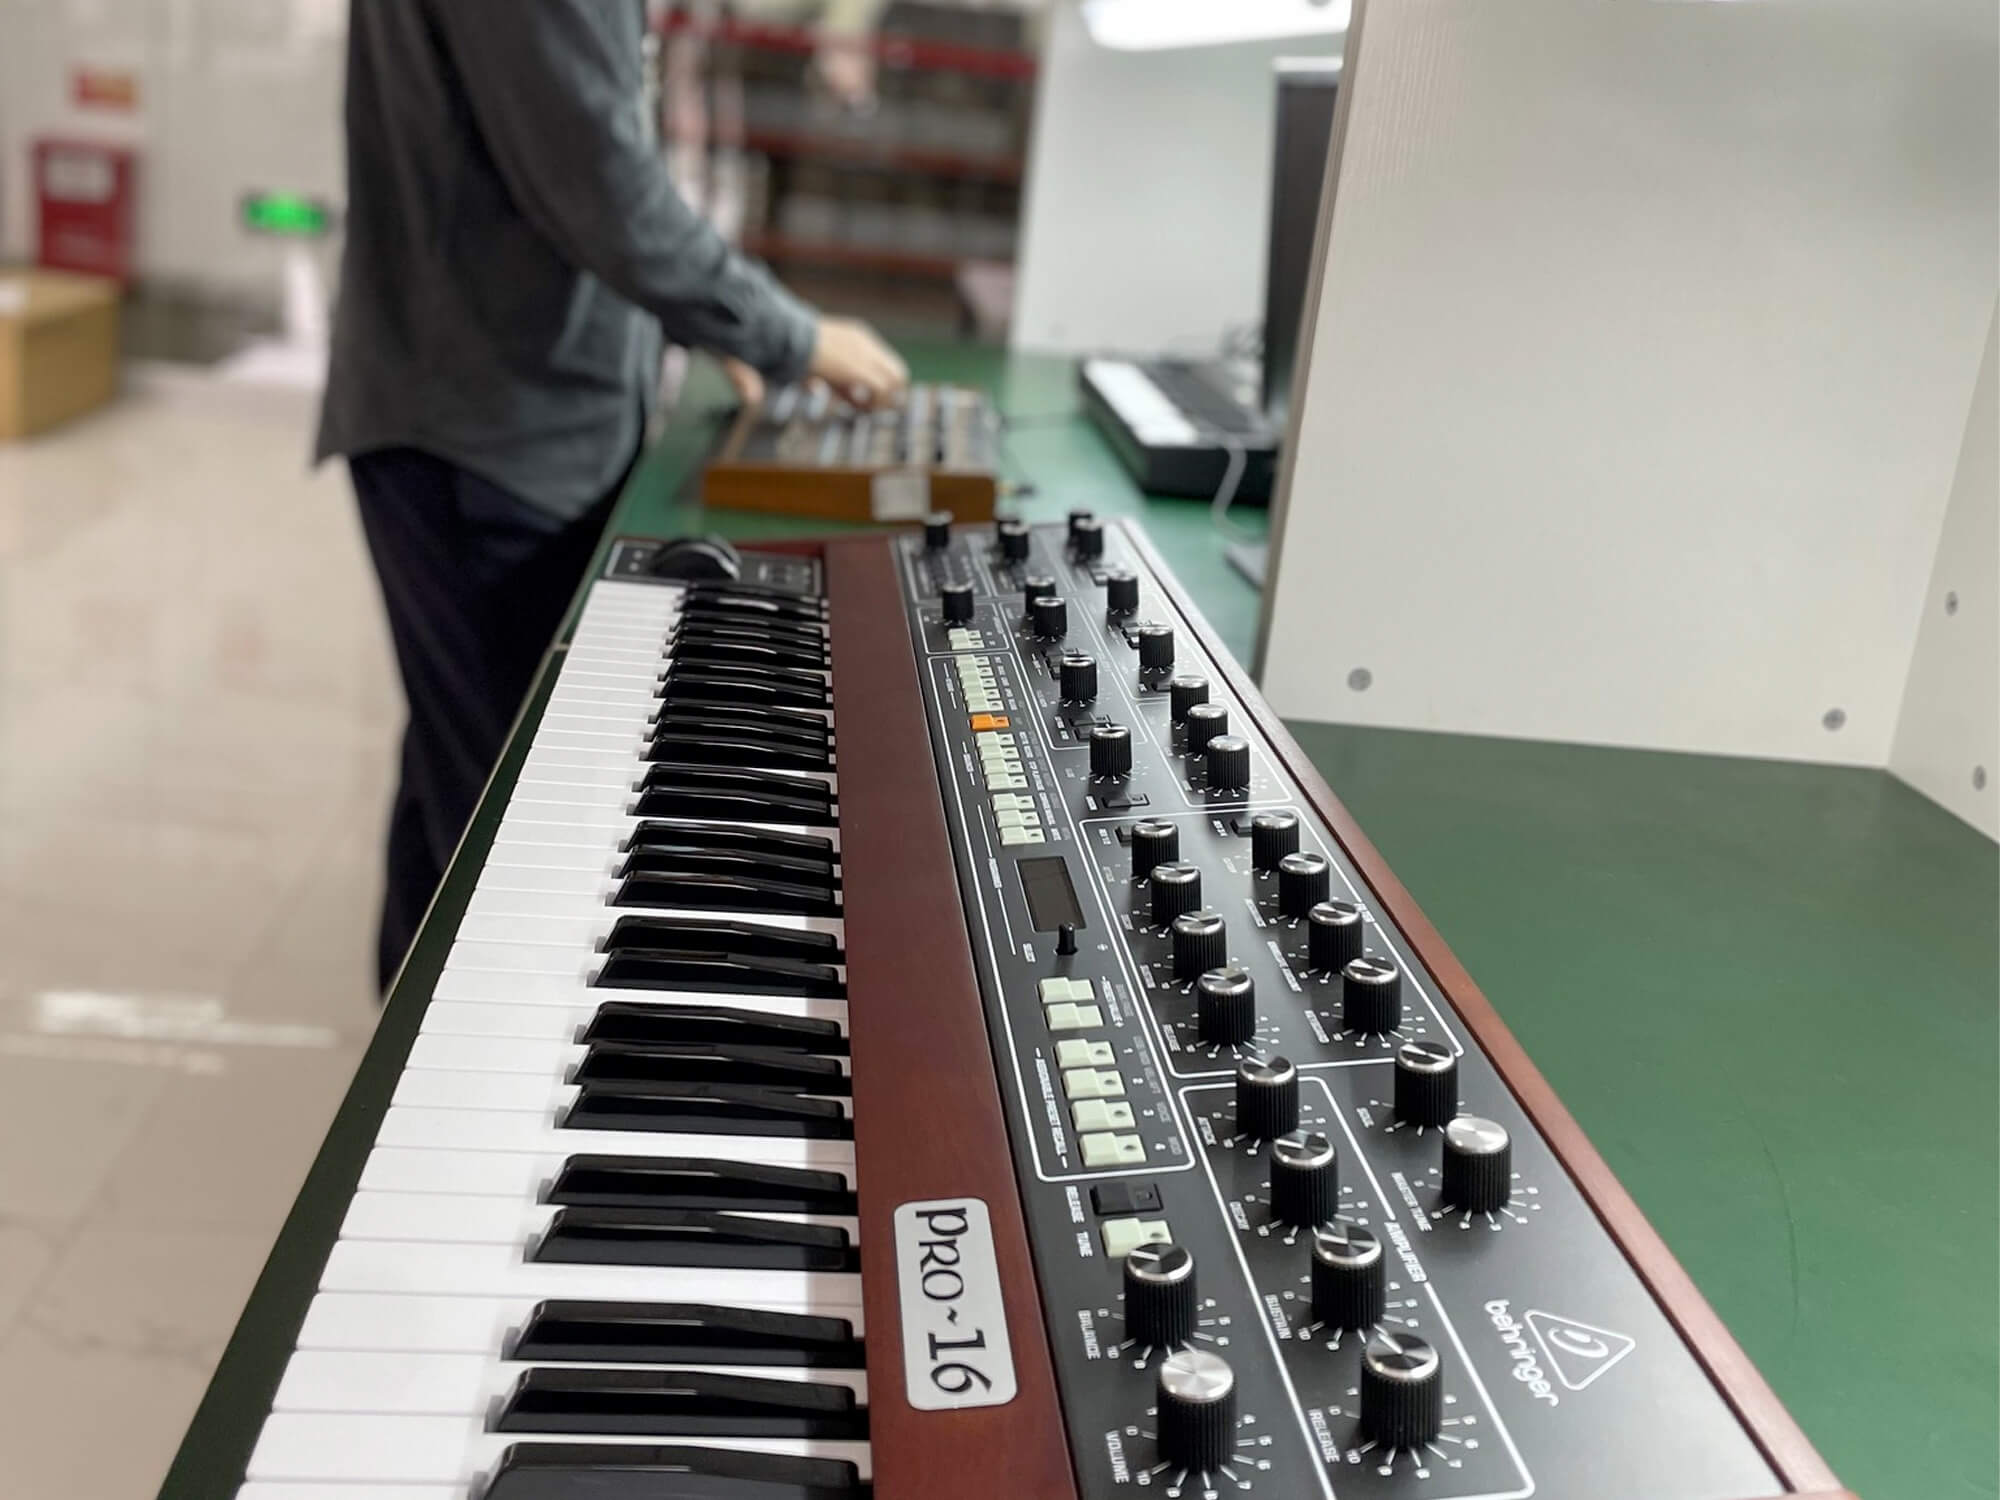 Behringer's Pro-16, its long-awaited Prophet-5 reproduction, is